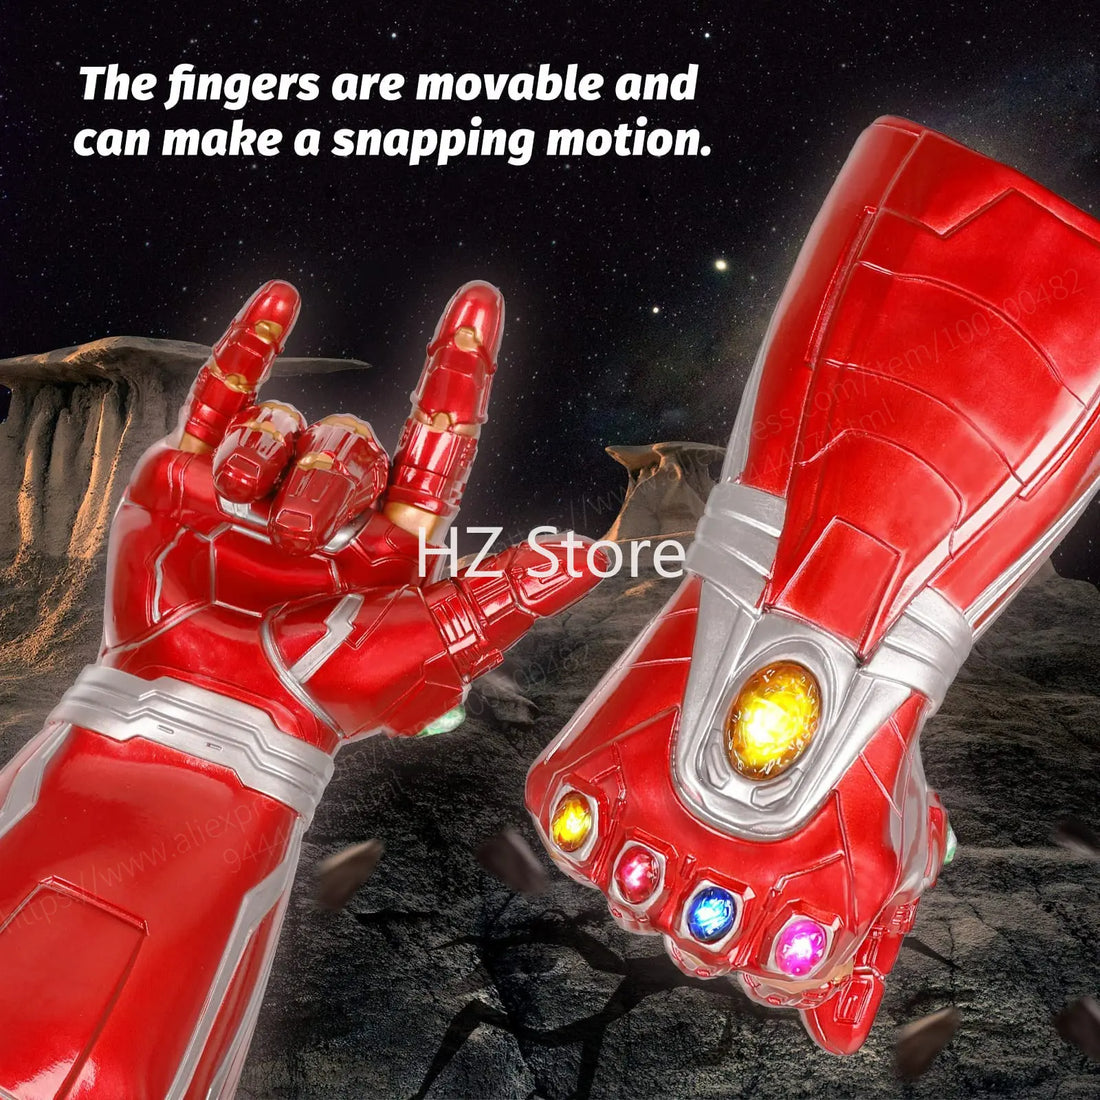 Marvel Iron Man Glove with Non or Removable Gem Stones, Ironman Fist Cos, Infinity Gauntlet, Replica for Adults Kids, Gift